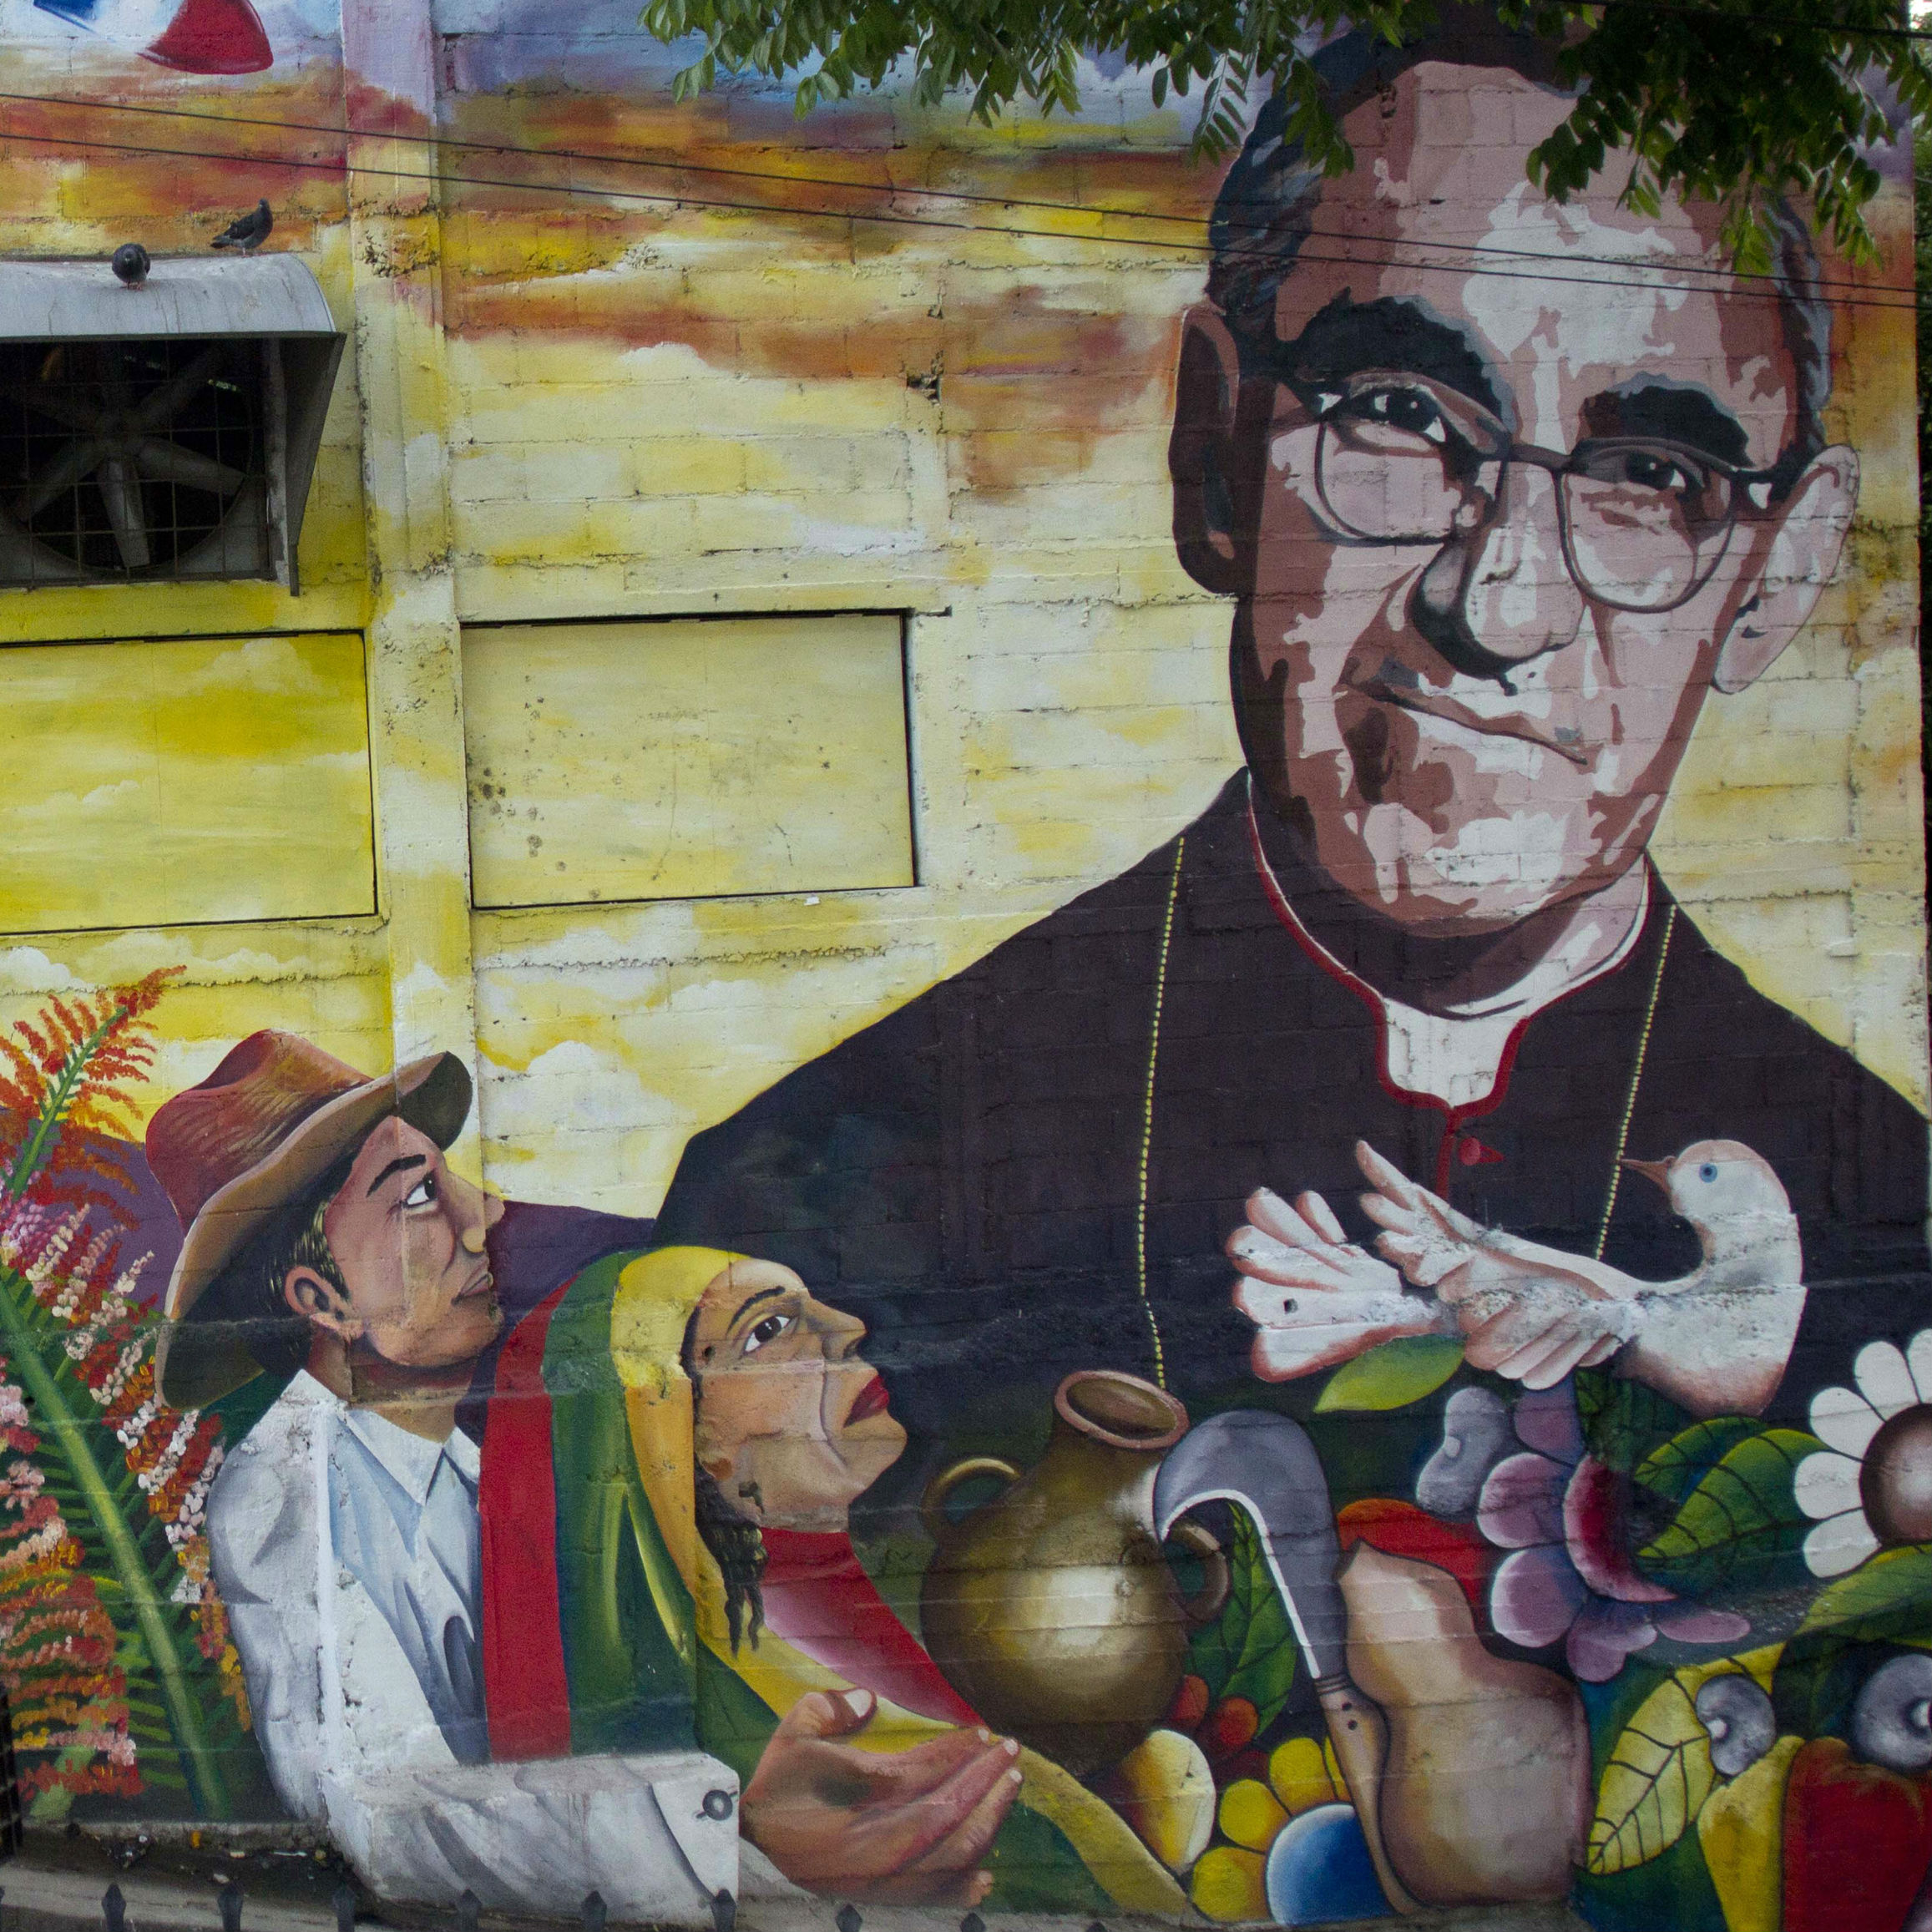 Relics of Blessed Oscar Romero join 14 Catholic 'Witnesses for Freedom' in fortnight for religious liberty 